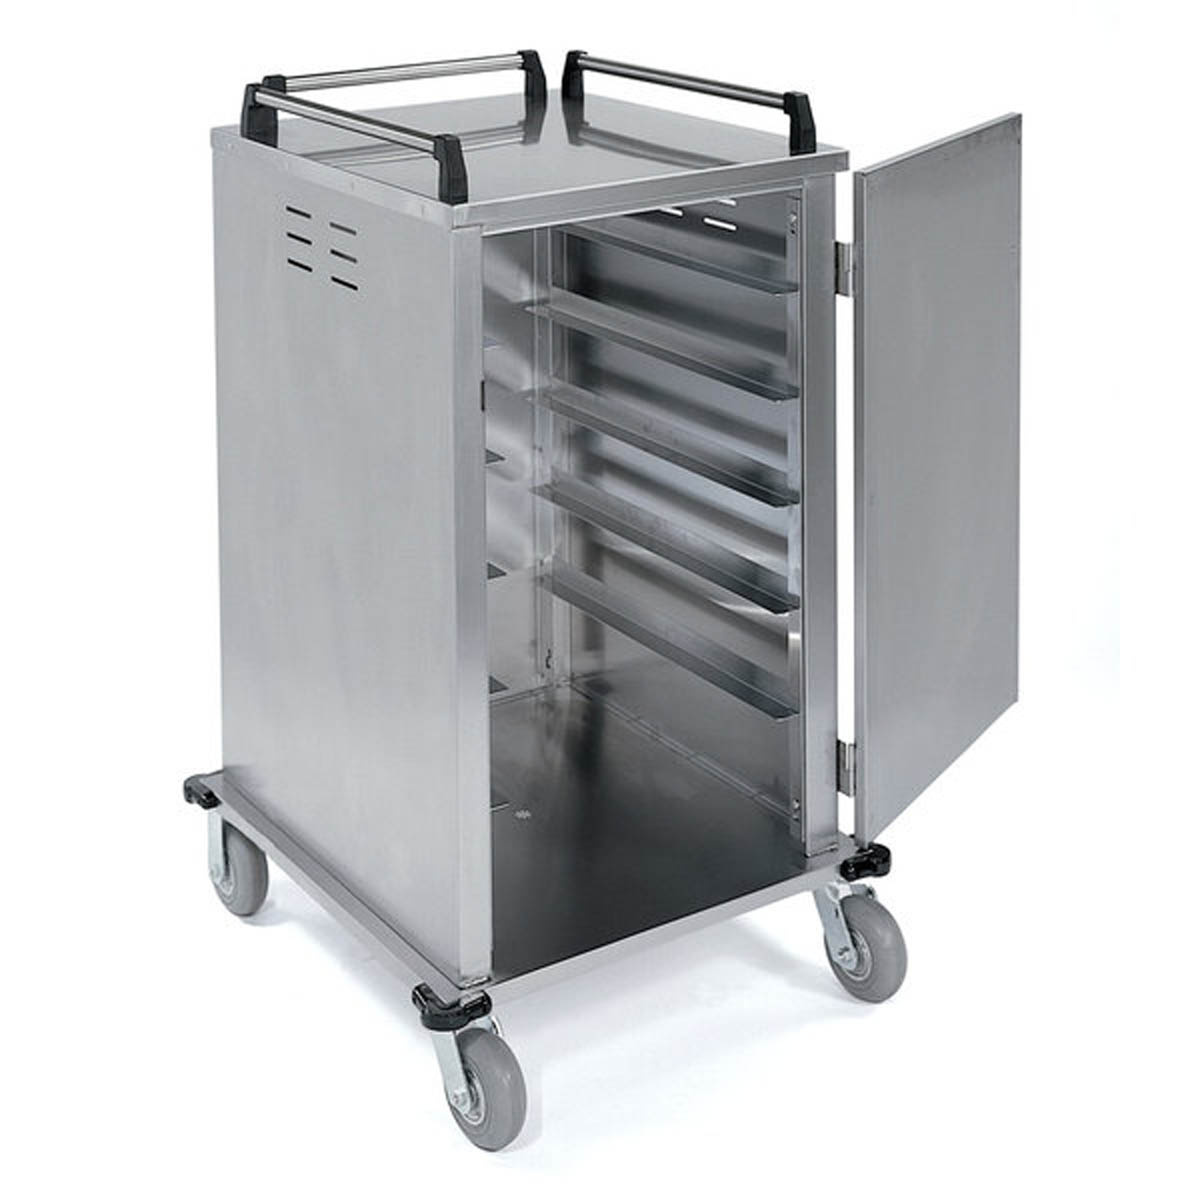 Lakeside 5510 Meal Delivery Tray Cart, 6 Trays